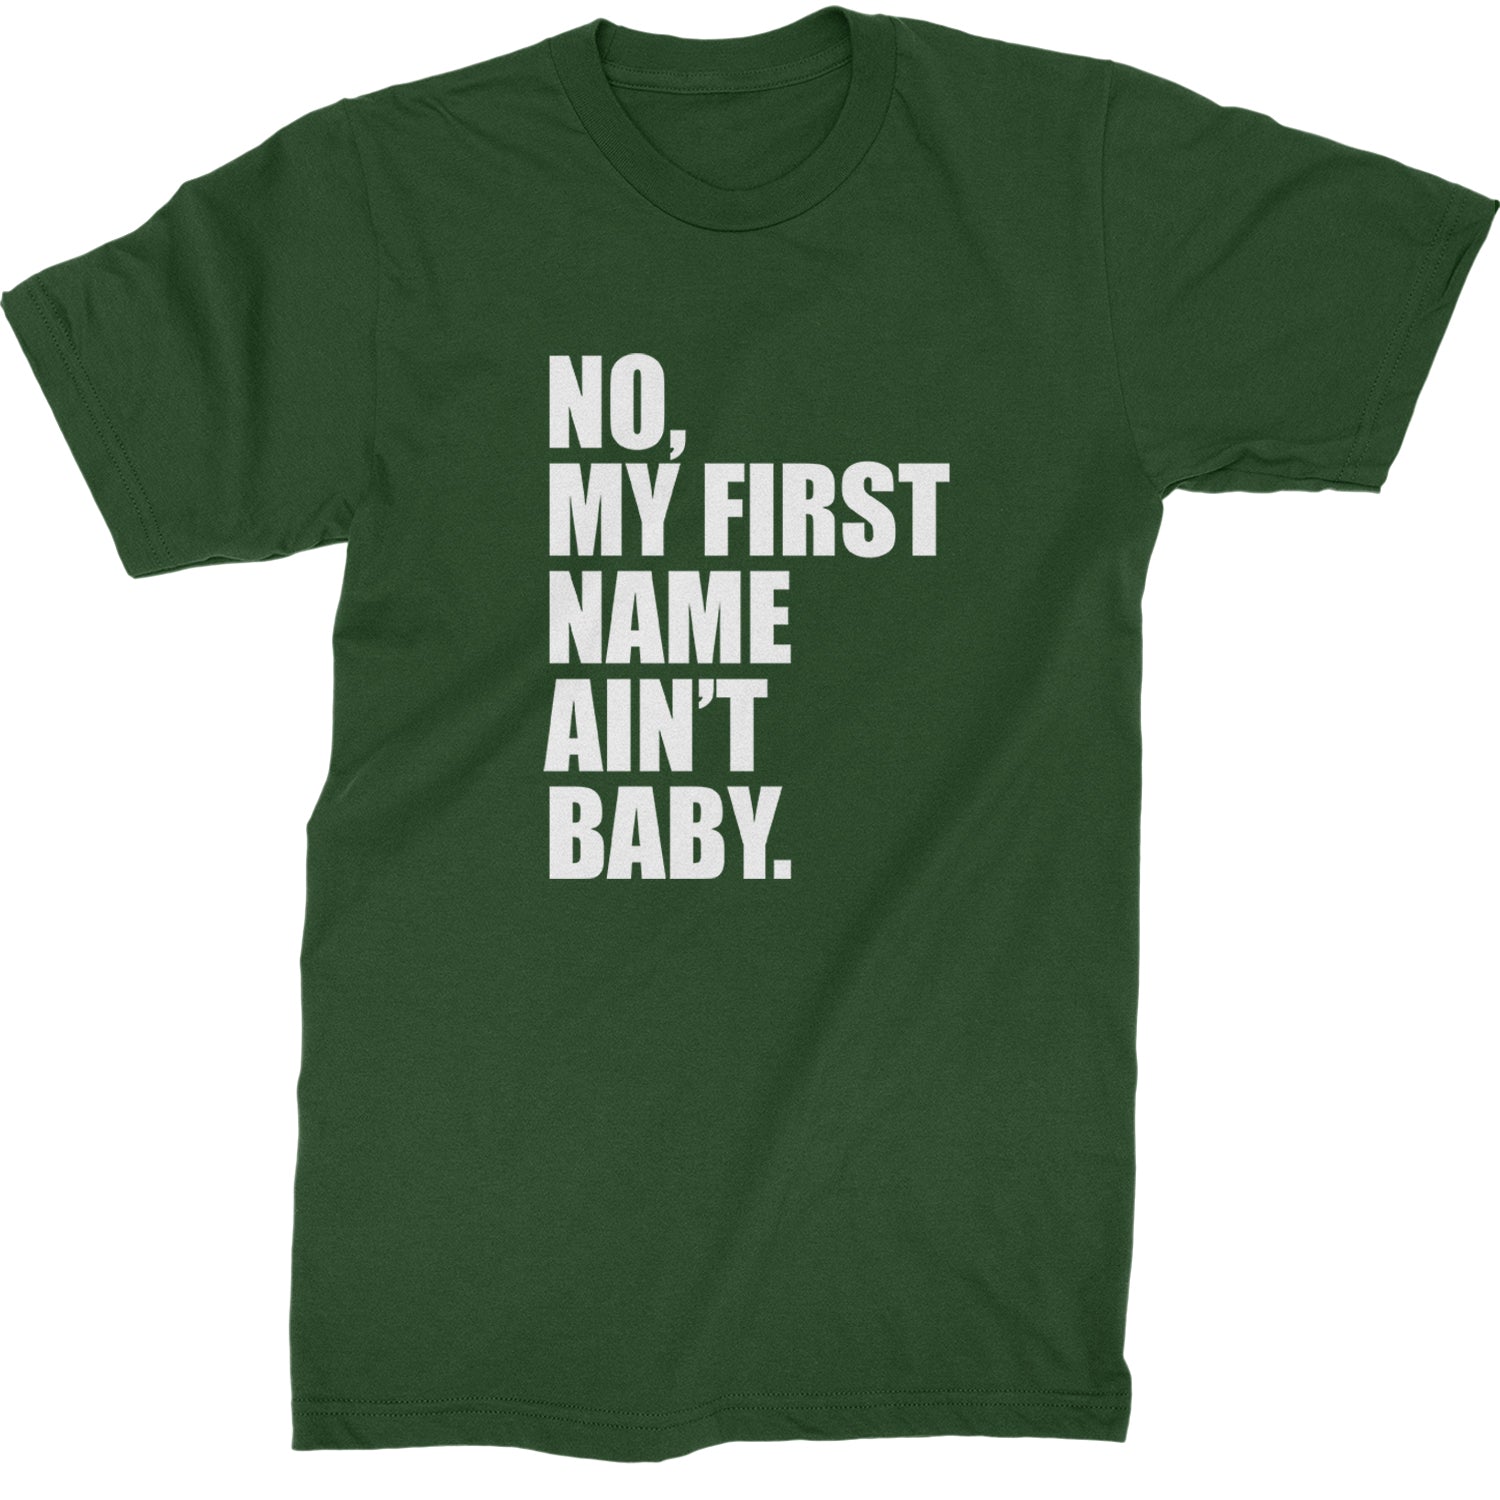 No My First Name Ain't Baby Together Again Mens T-shirt Forest Green